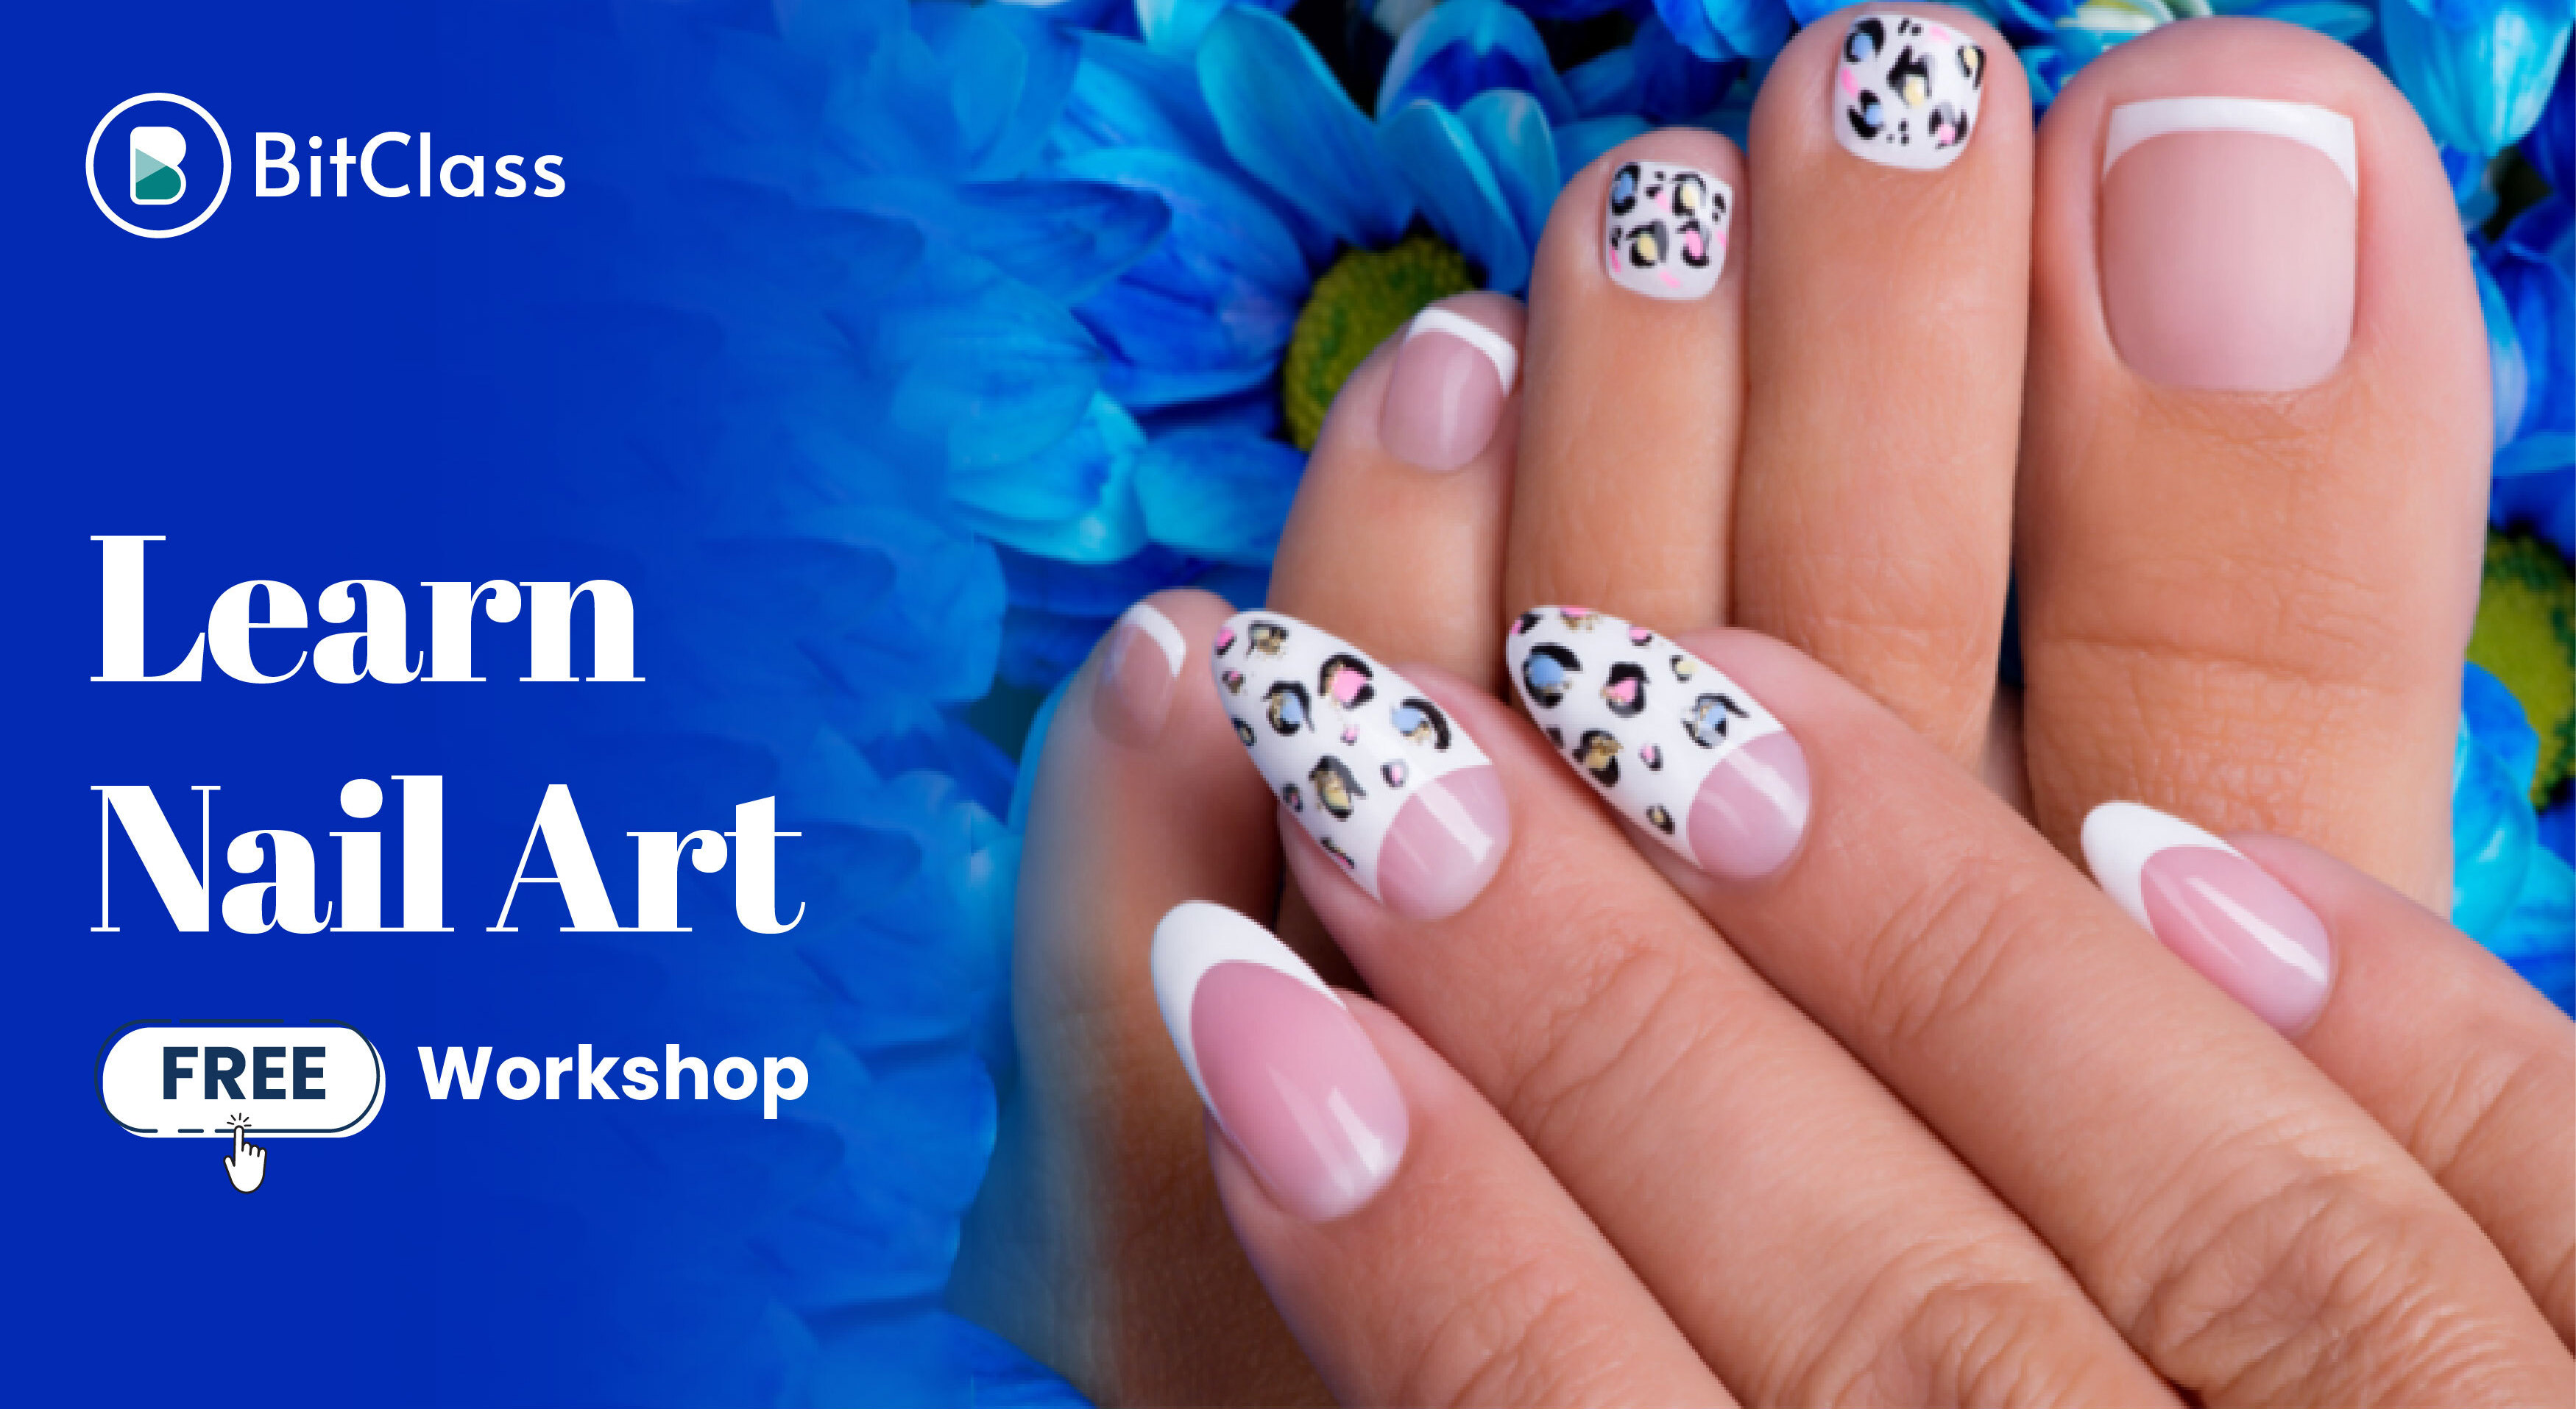 3. Nail Art Courses at South Delhi Beauty Academy - wide 7